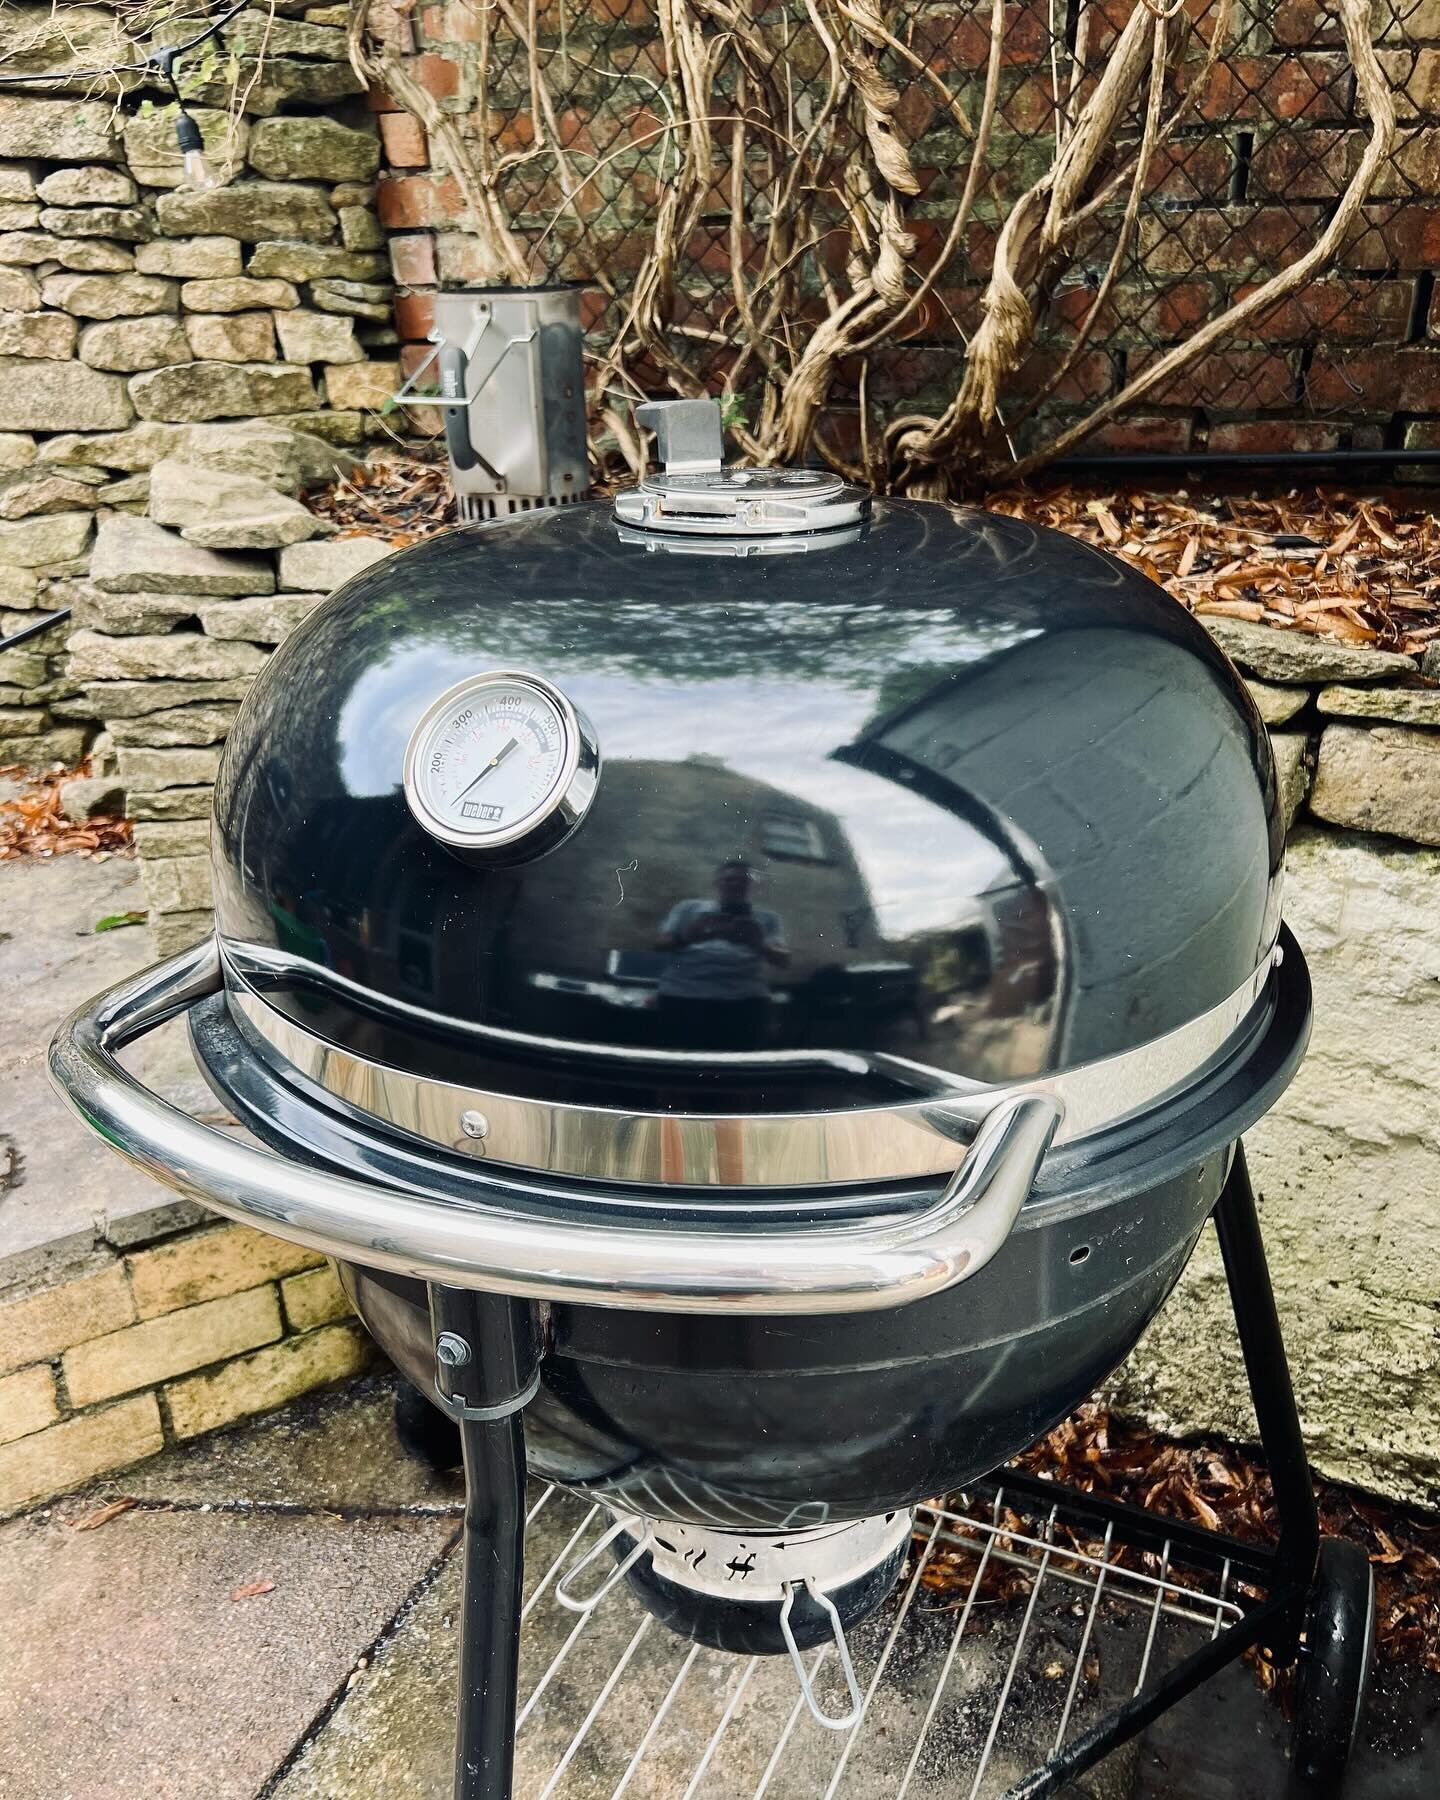 I&rsquo;ve been a full time BBQ guy for over 15 years and this is my favourite all time grill. I got this one in 2016 and, on average, cook on it four times a week. That&rsquo;s 2-3 times over winter and probably 5-6 times in summer. I work that out 